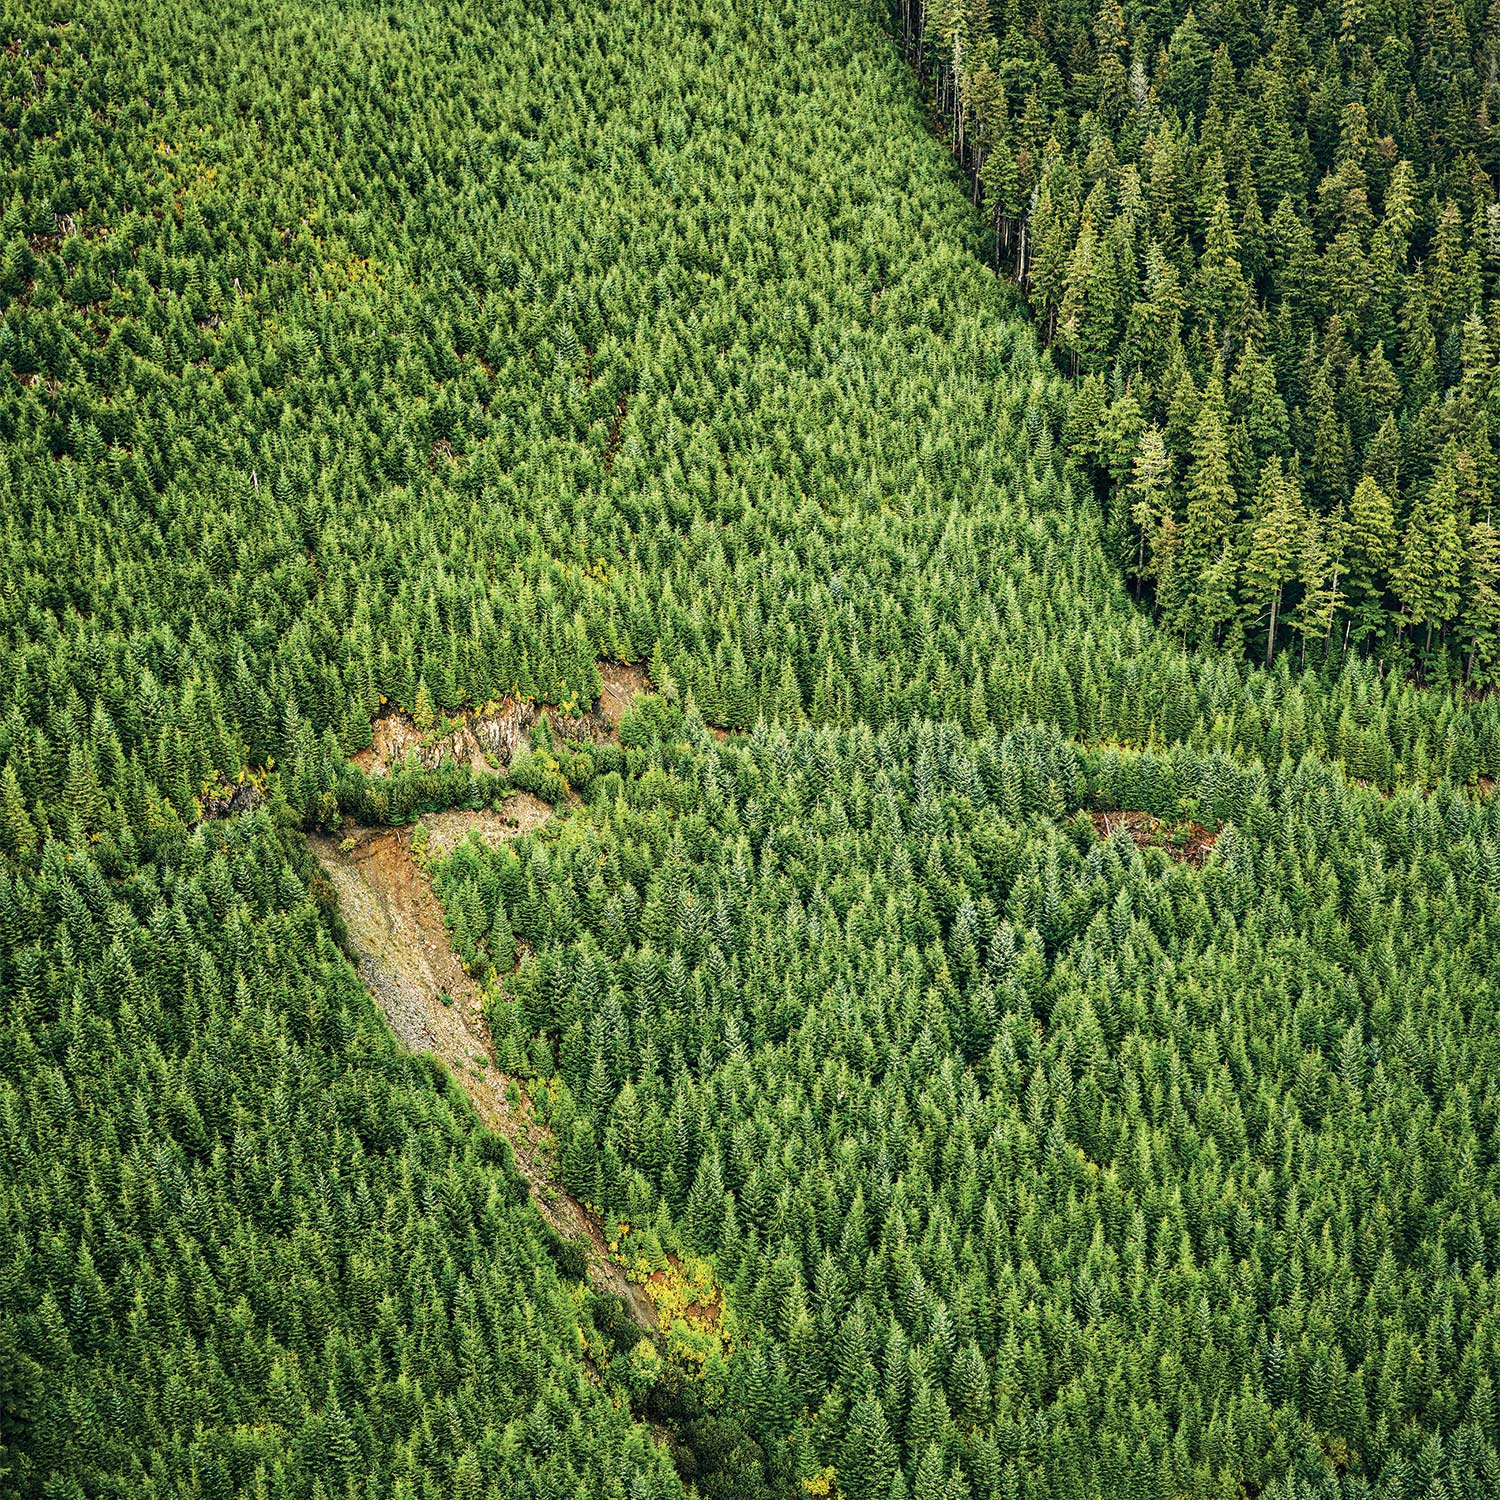 A stand of coniferous forest growth in Tongass National Forest.